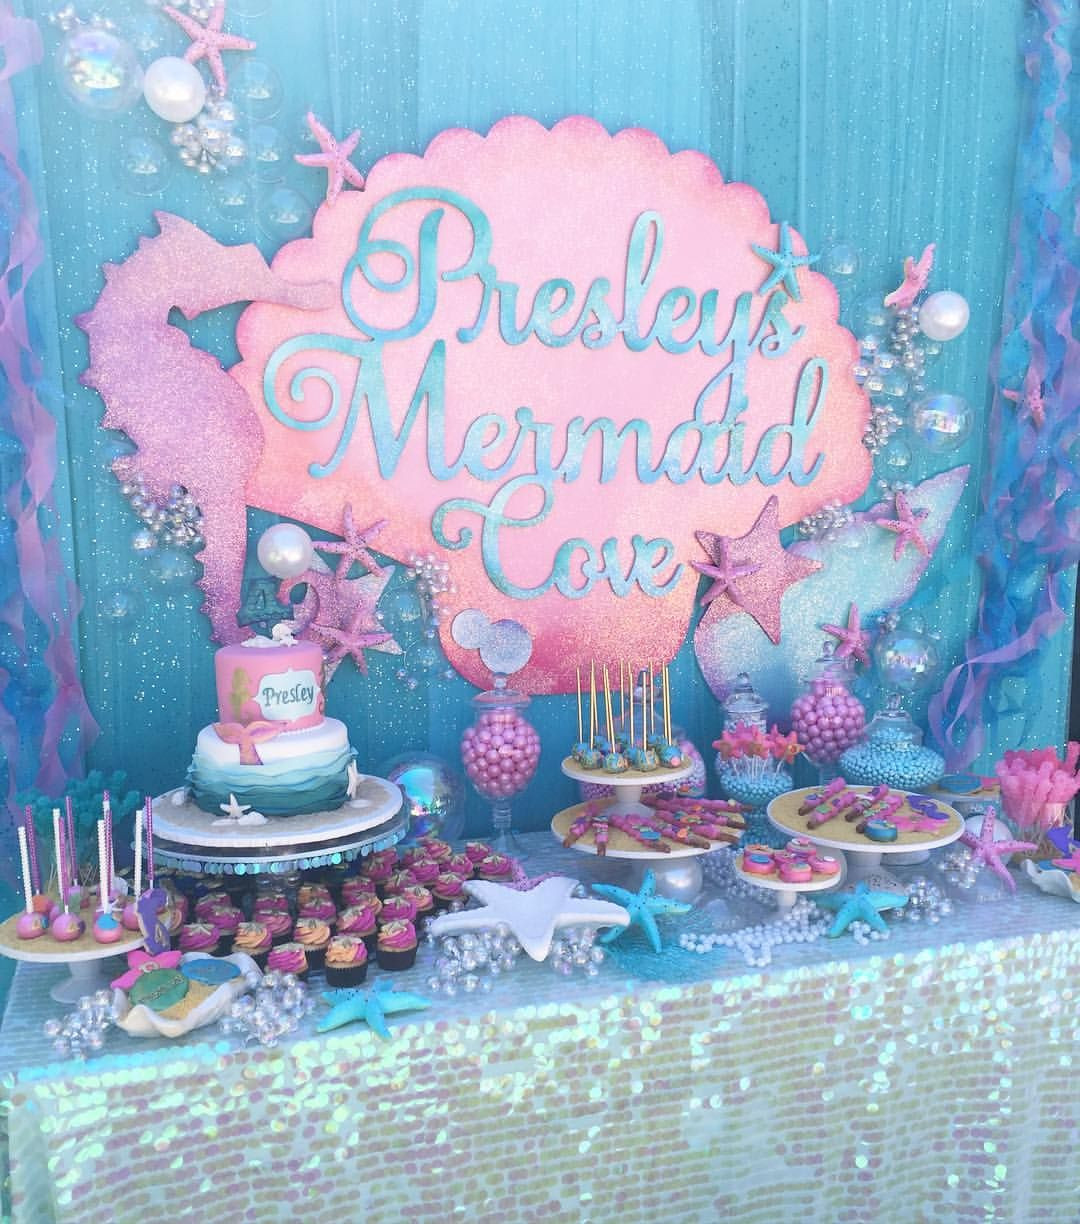 Mermaid Birthday Party Decoration Ideas
 Up bright and early for the most adorable mermaid party